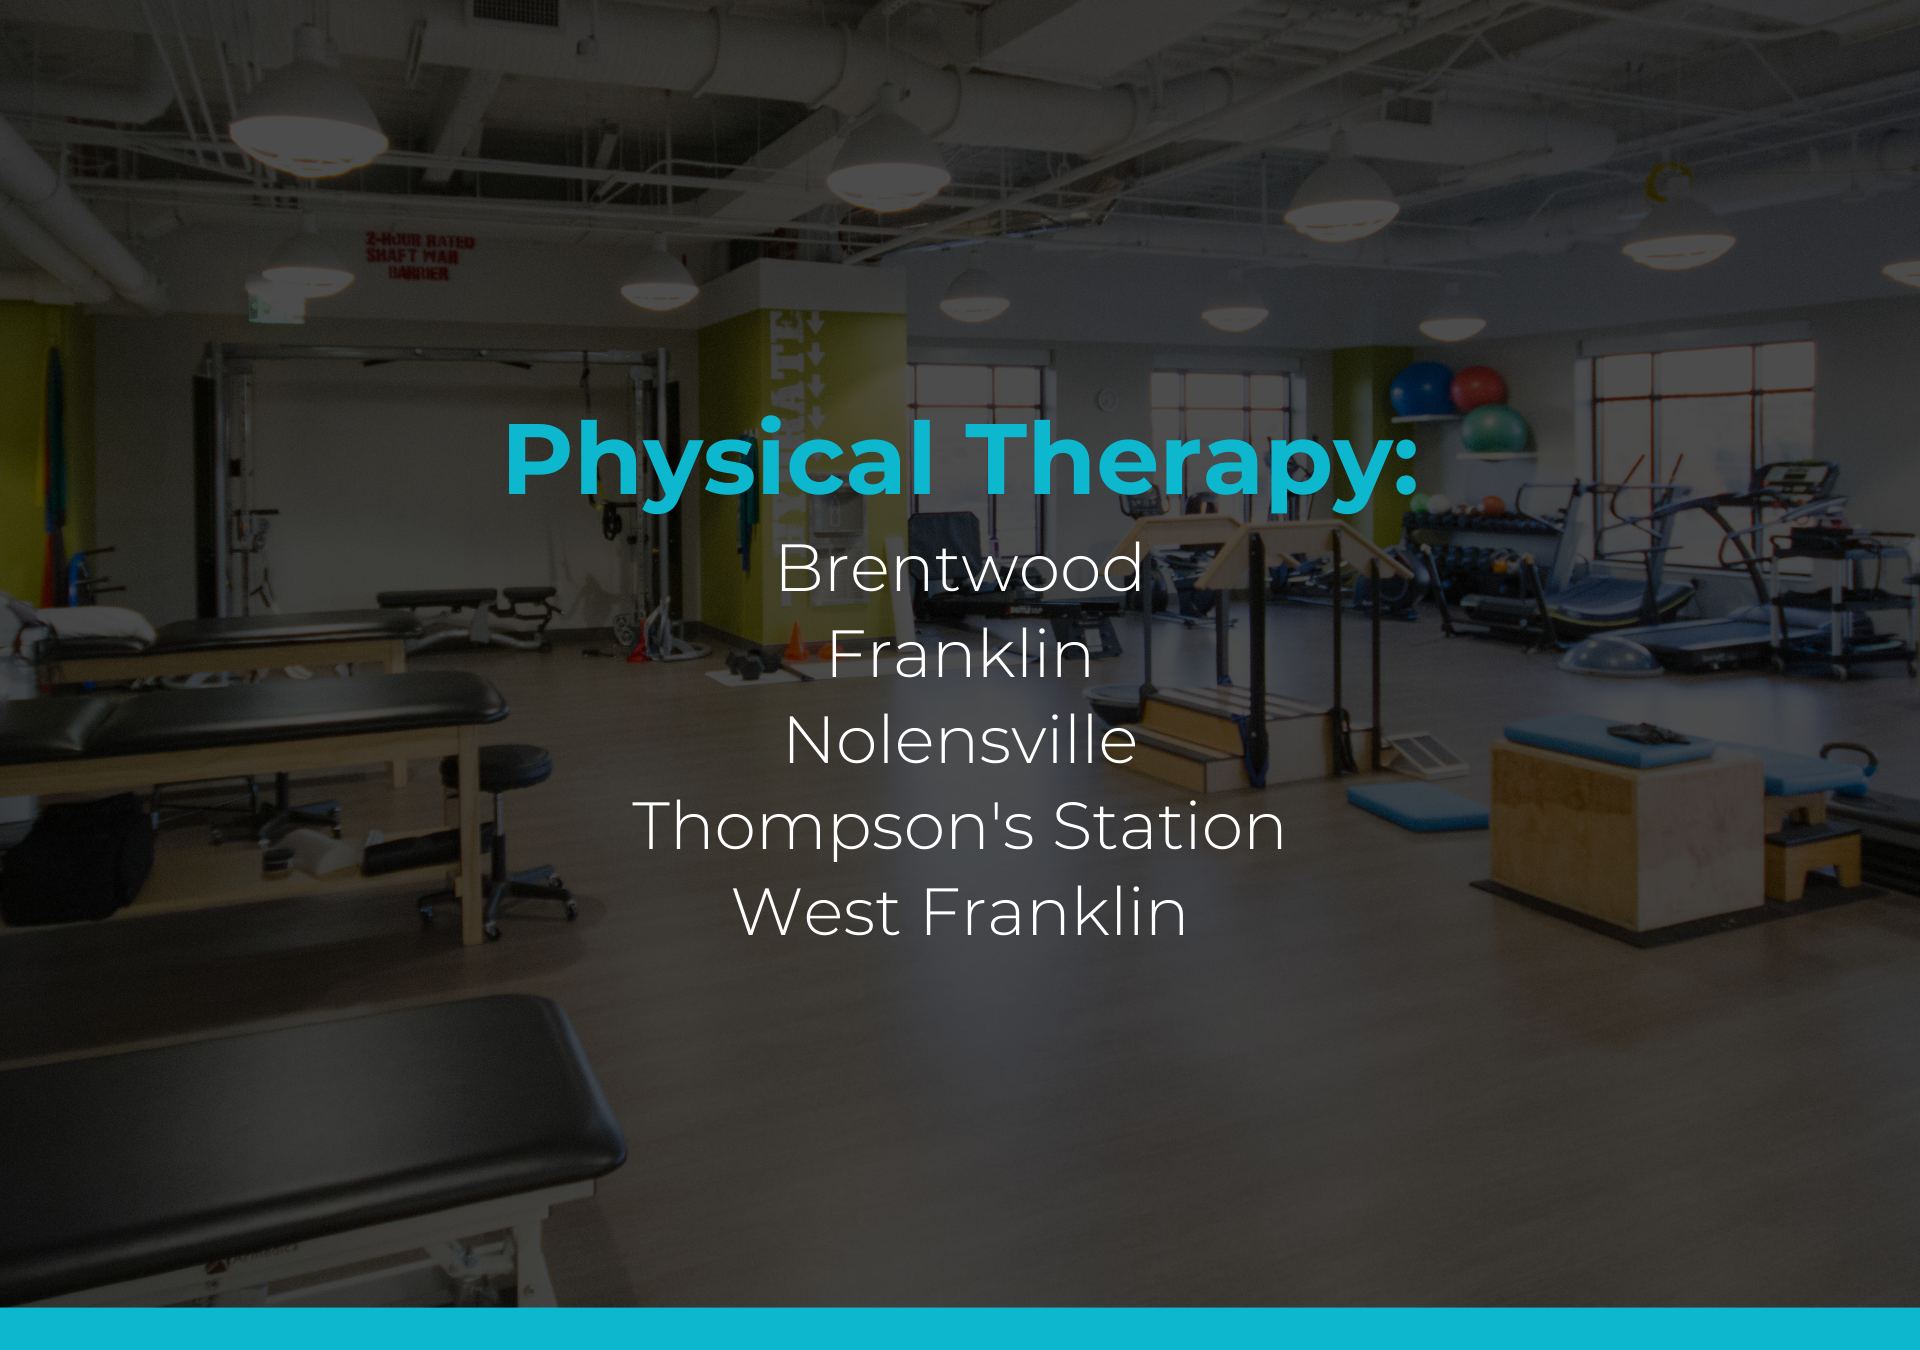 Physical therapy